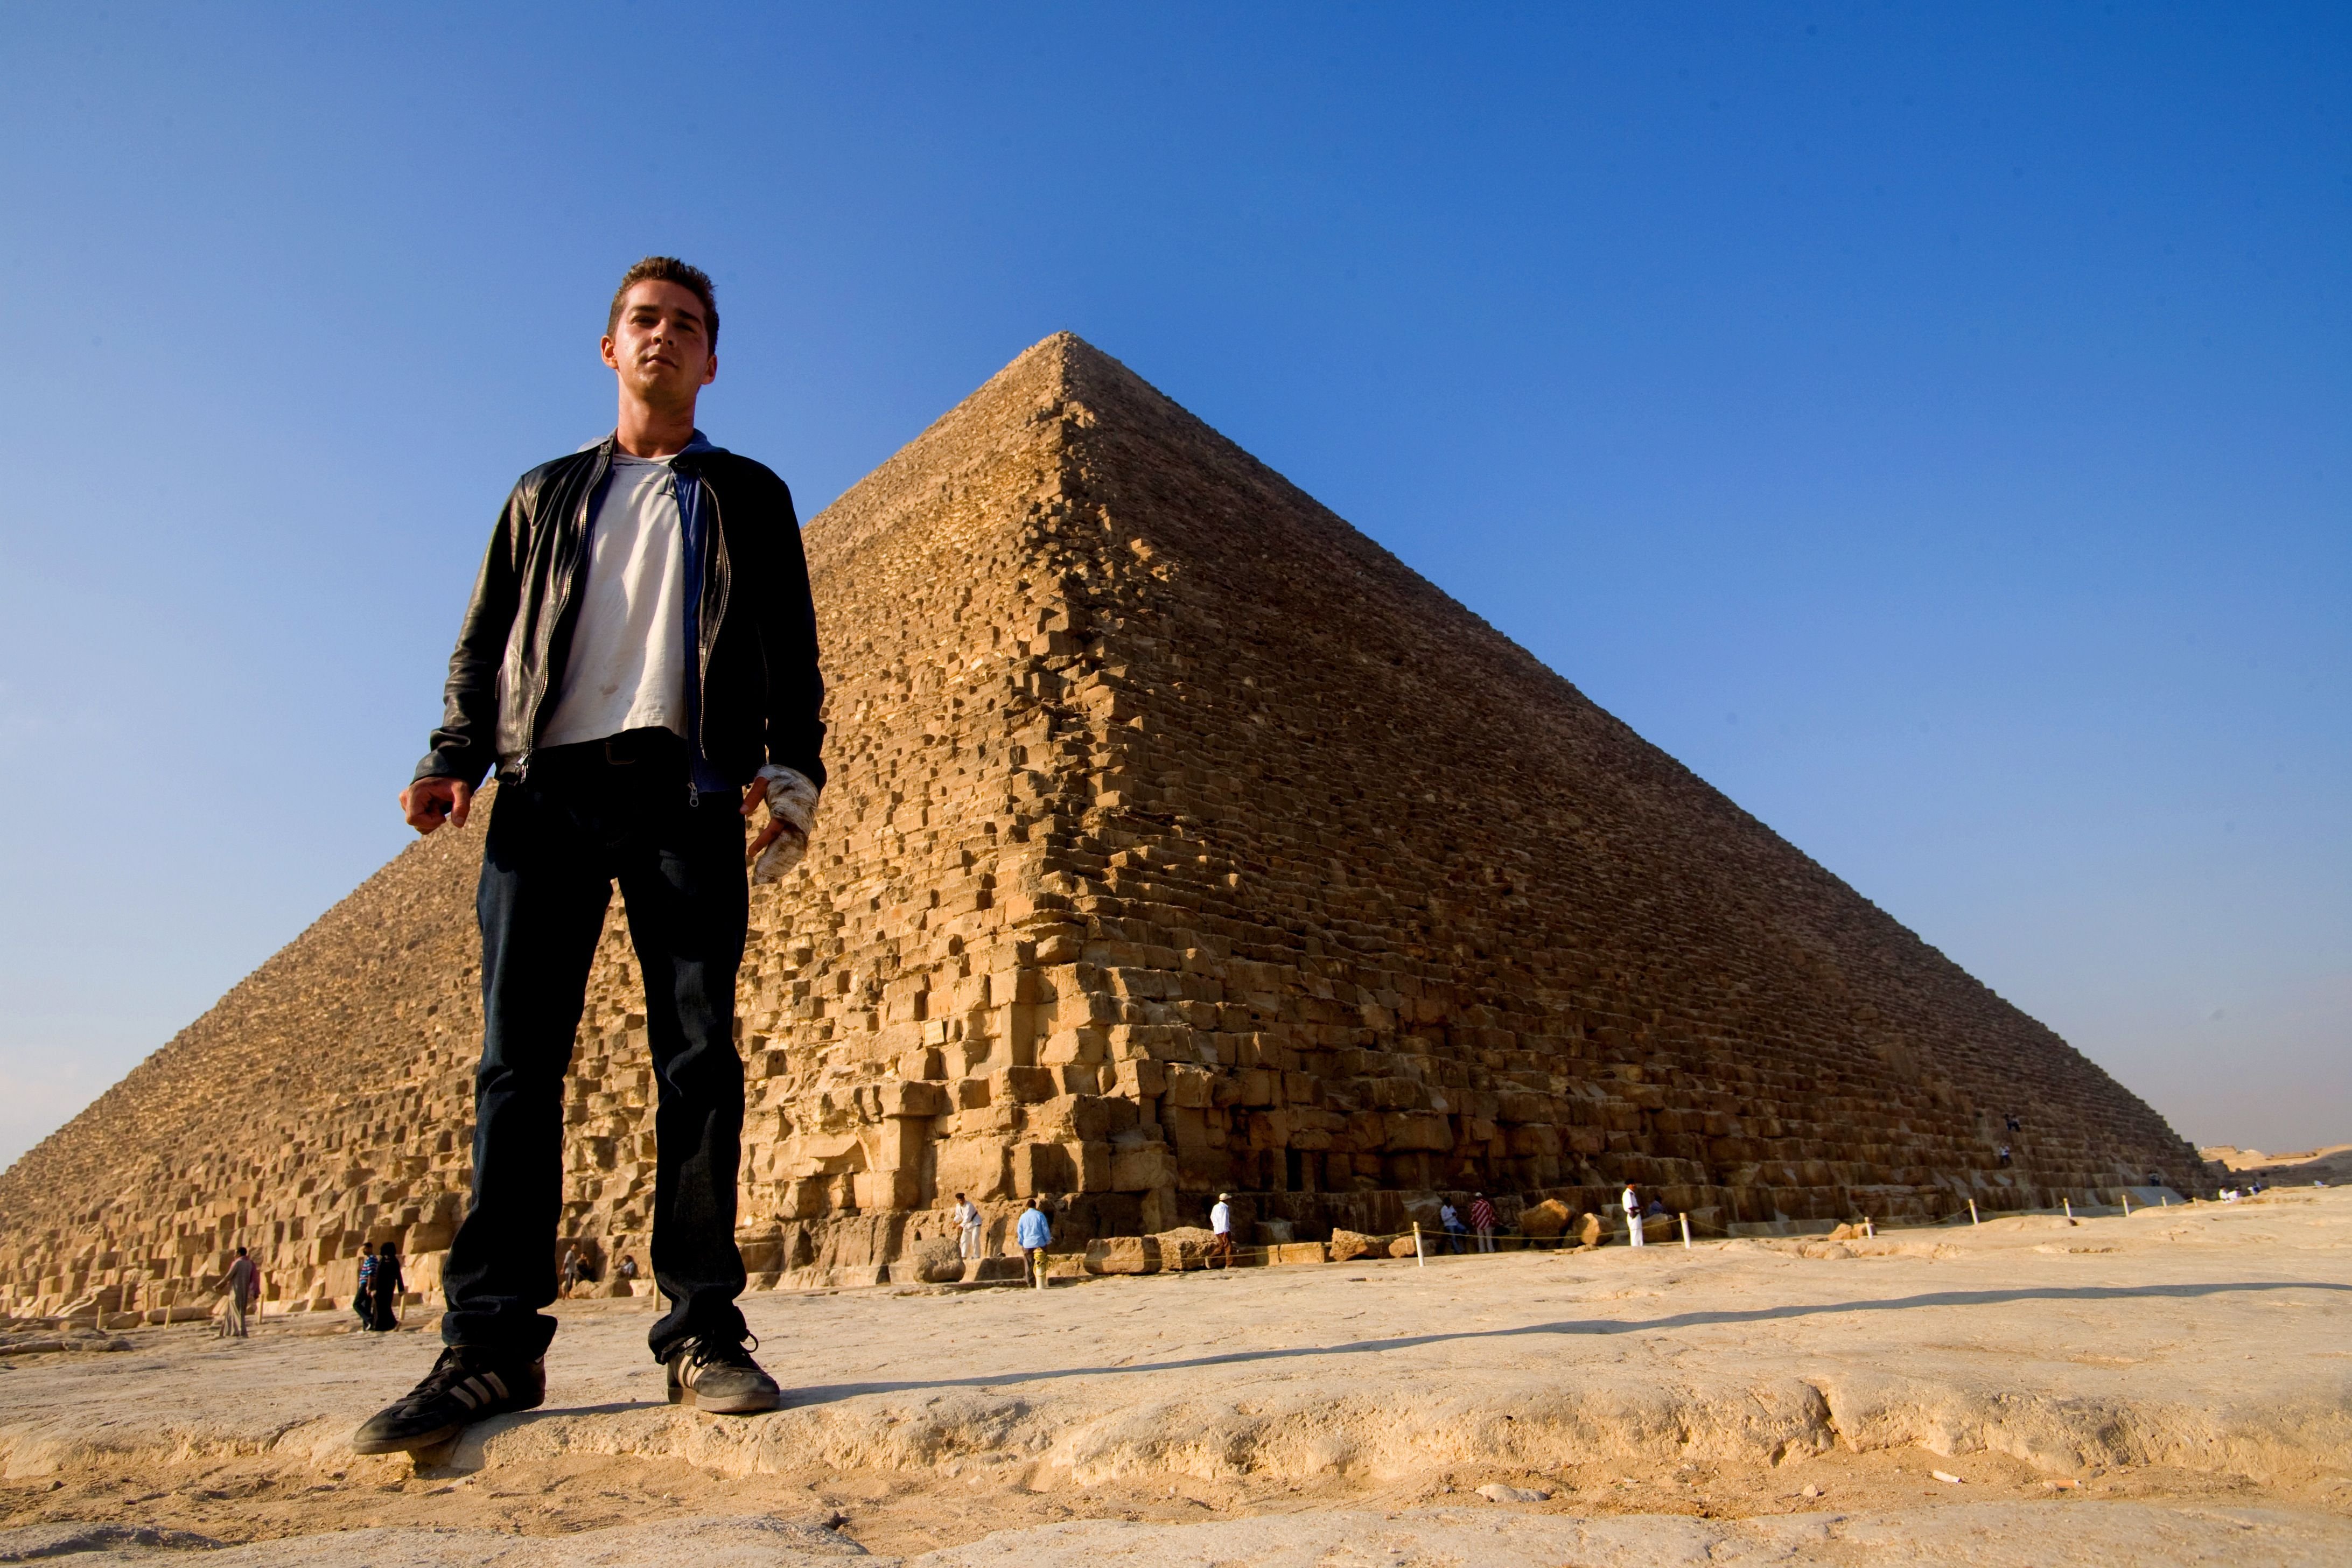 Shia LaBeouf standing next to the Great Pyramid on set of Transformers: Revenge of the Fallen